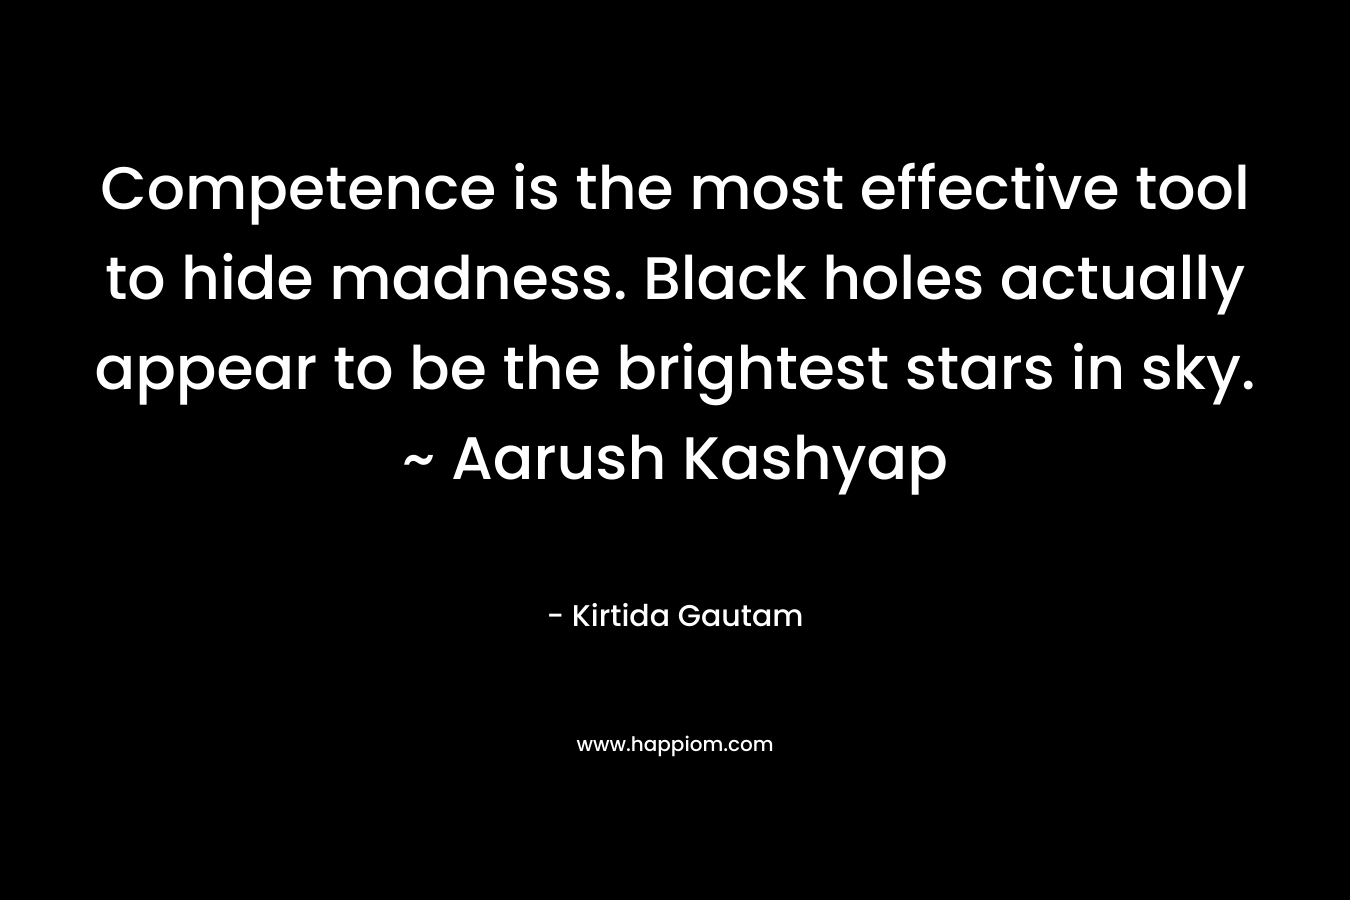 Competence is the most effective tool to hide madness. Black holes actually appear to be the brightest stars in sky. ~ Aarush Kashyap